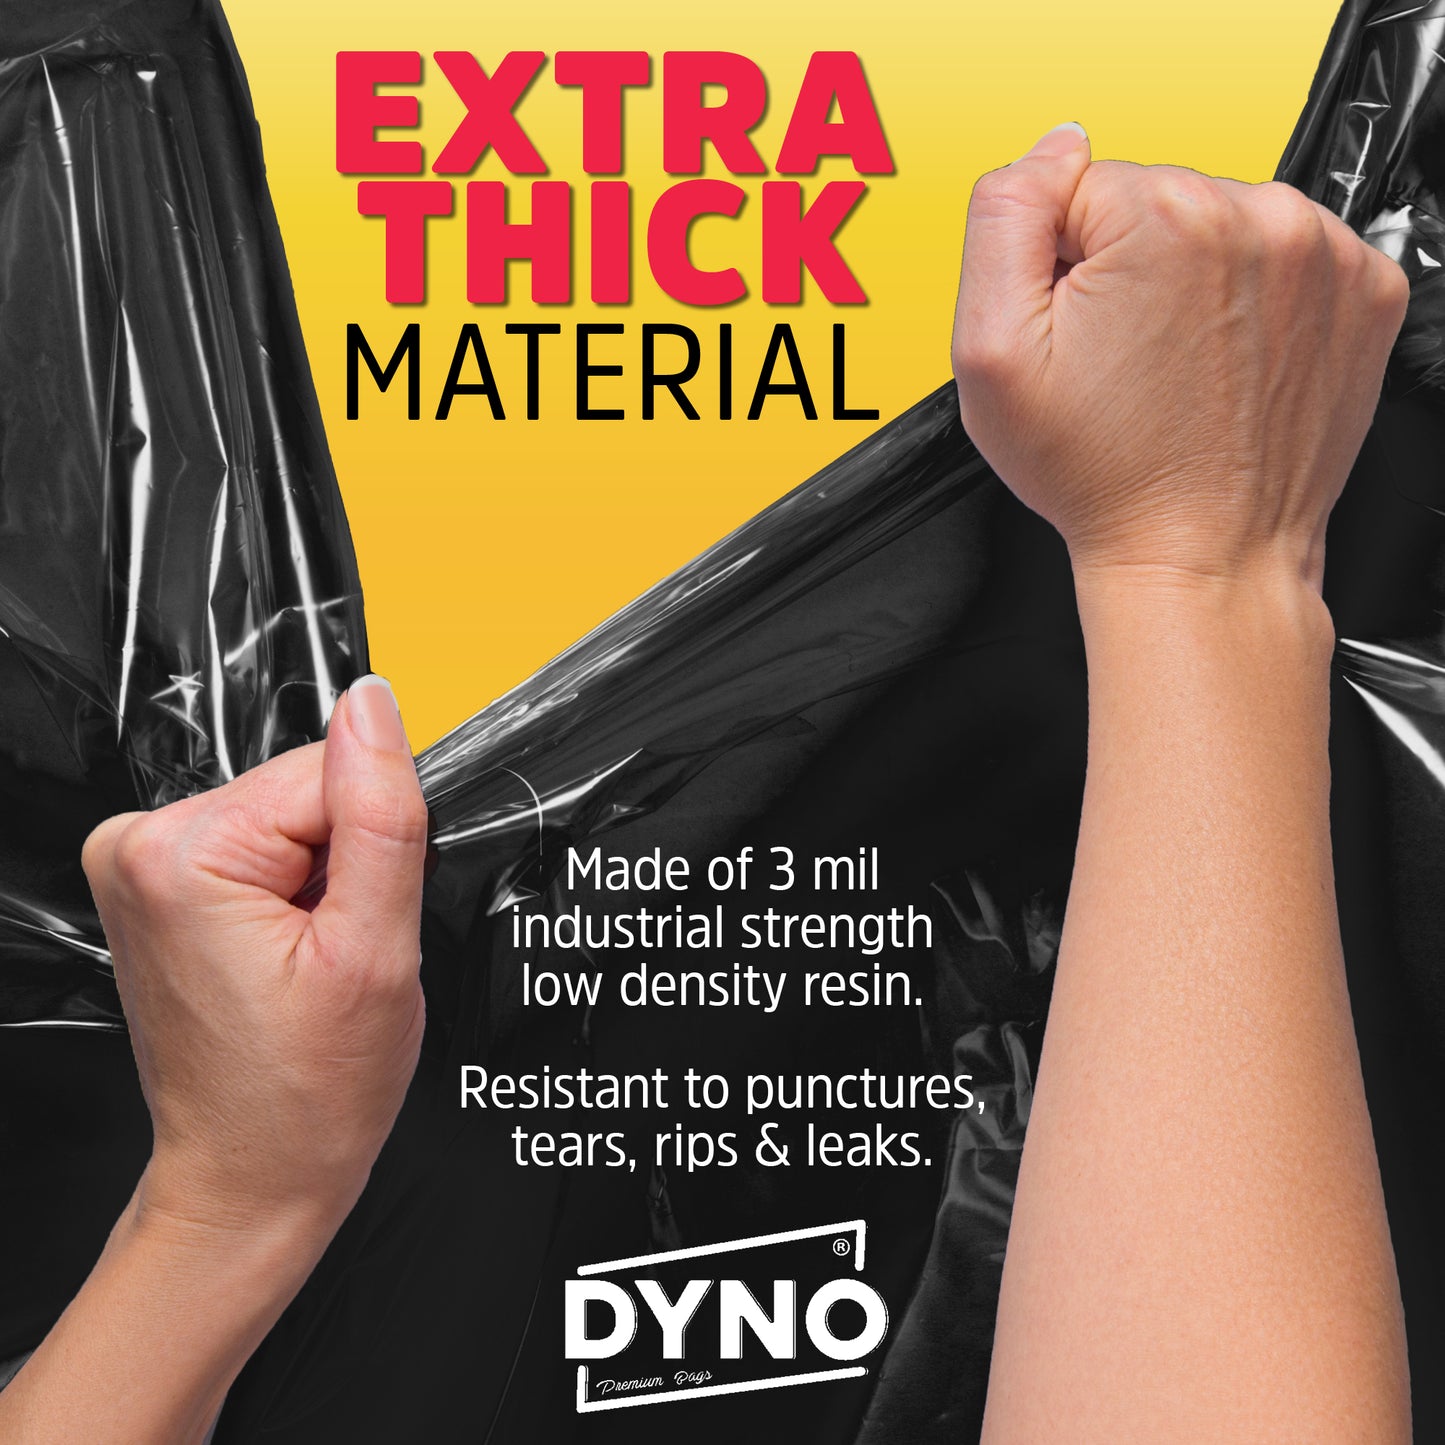 Dyno Products Online 42-Gallon, 3 Mil Thick Heavy-Duty Black Trash Bags - 36 Count Extra Large Plastic Garbage Liners Fit Huge Cans for Home Garden Lawn Yard Recycling Construction & Commercial Use